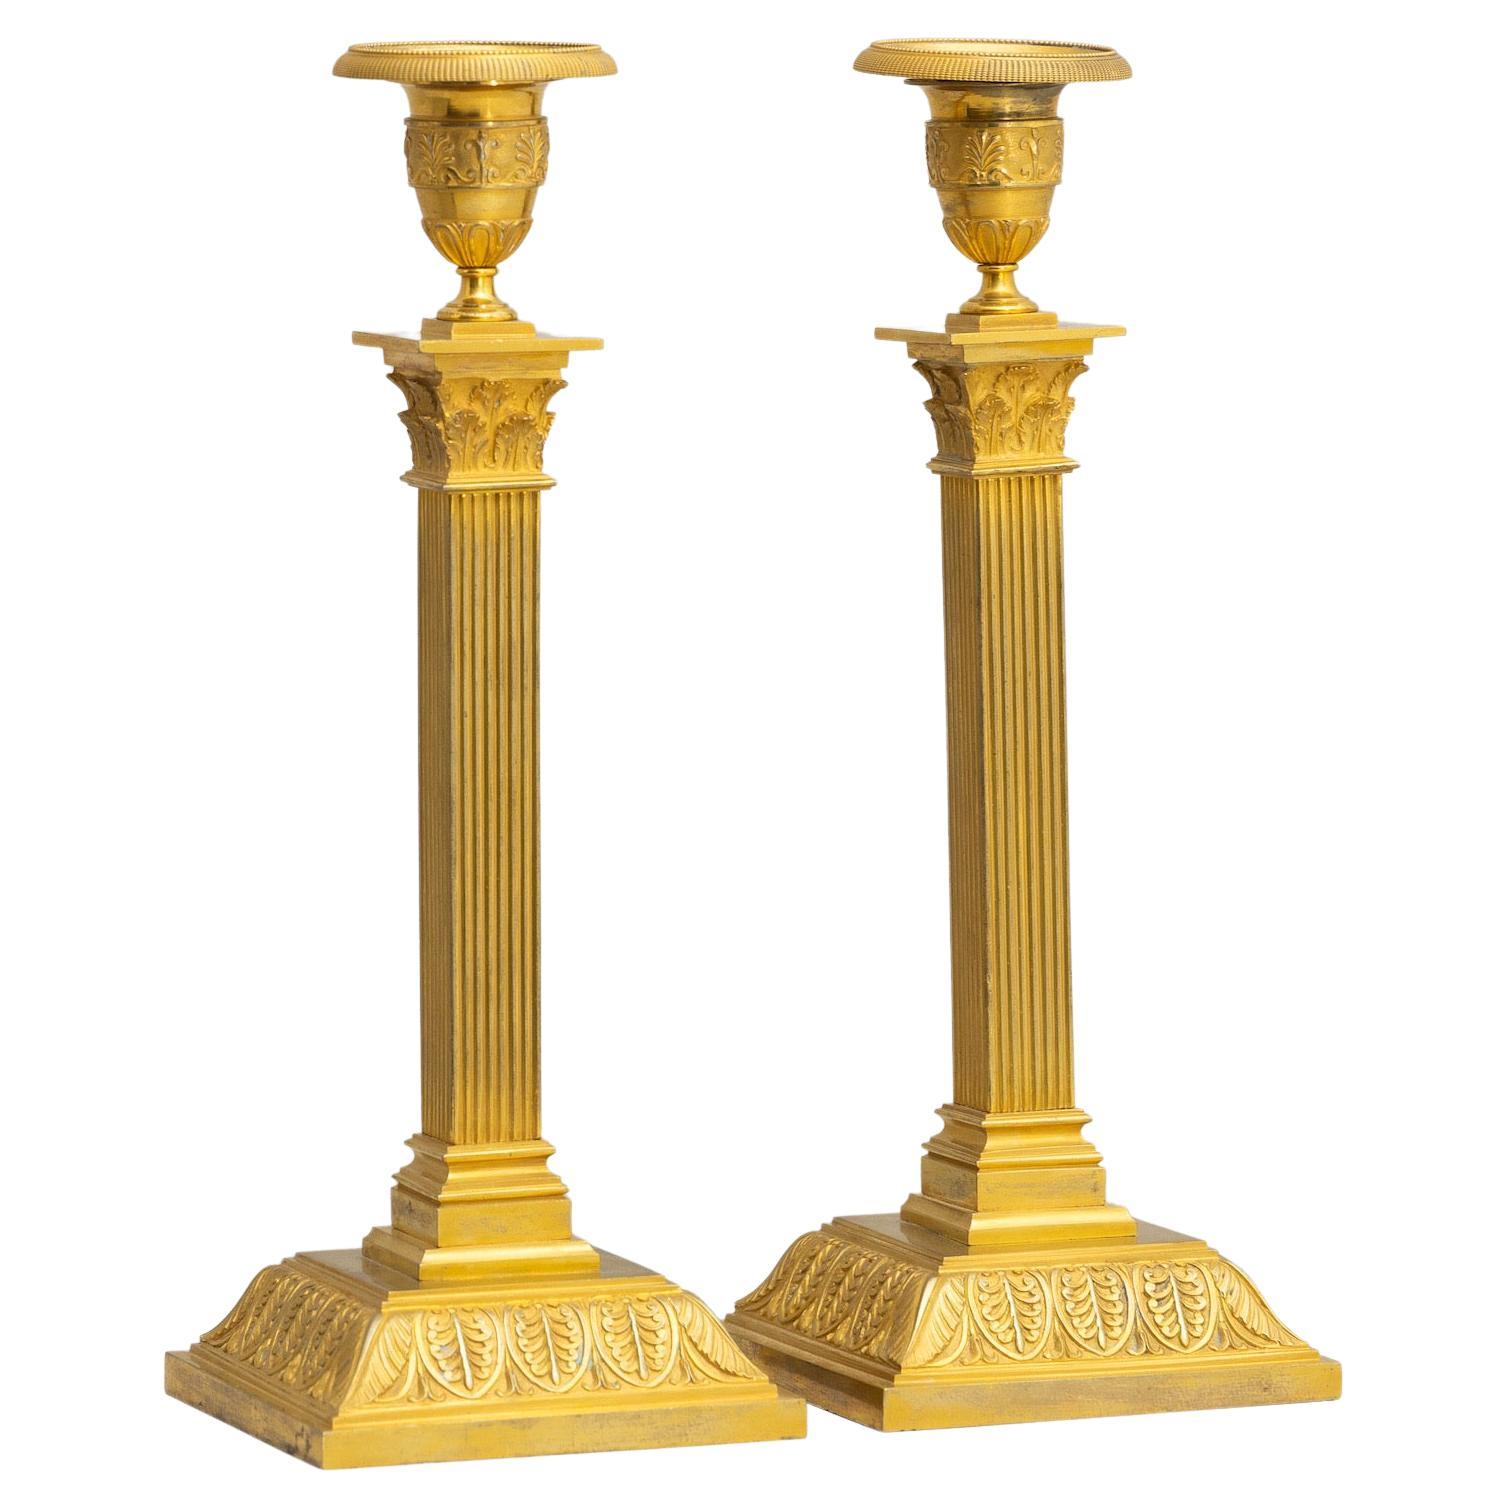 Pair of Candlesticks, Empire, Sweden, Early 19th Century